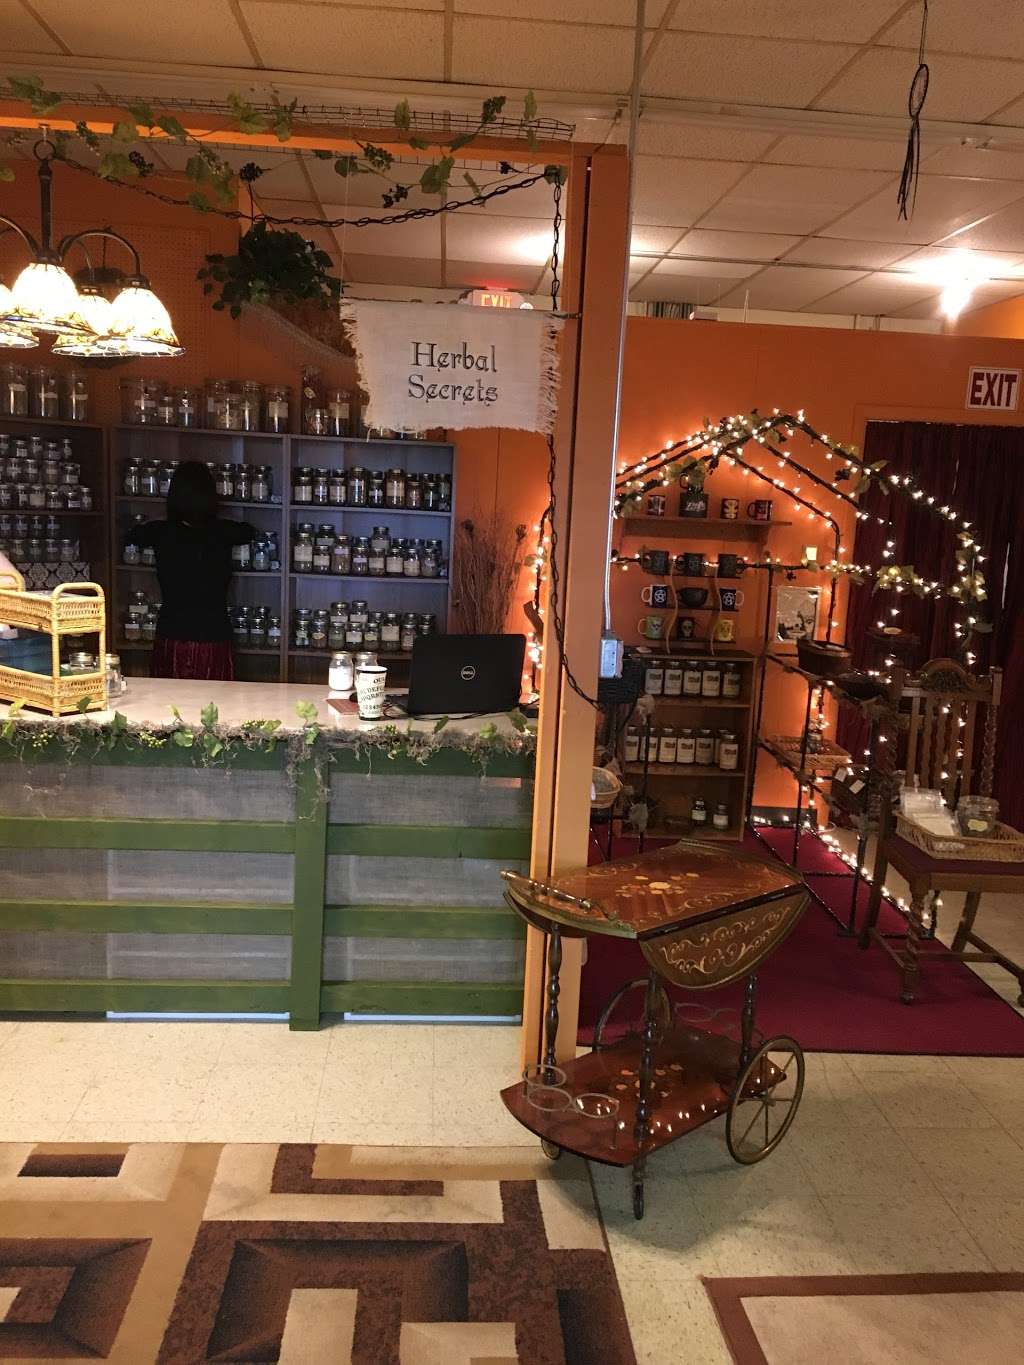 The Gypsy Haven Witch Shop Wiccan Supplies | 143 W River Rd, Elgin, IL 60123 | Phone: (815) 566-6007